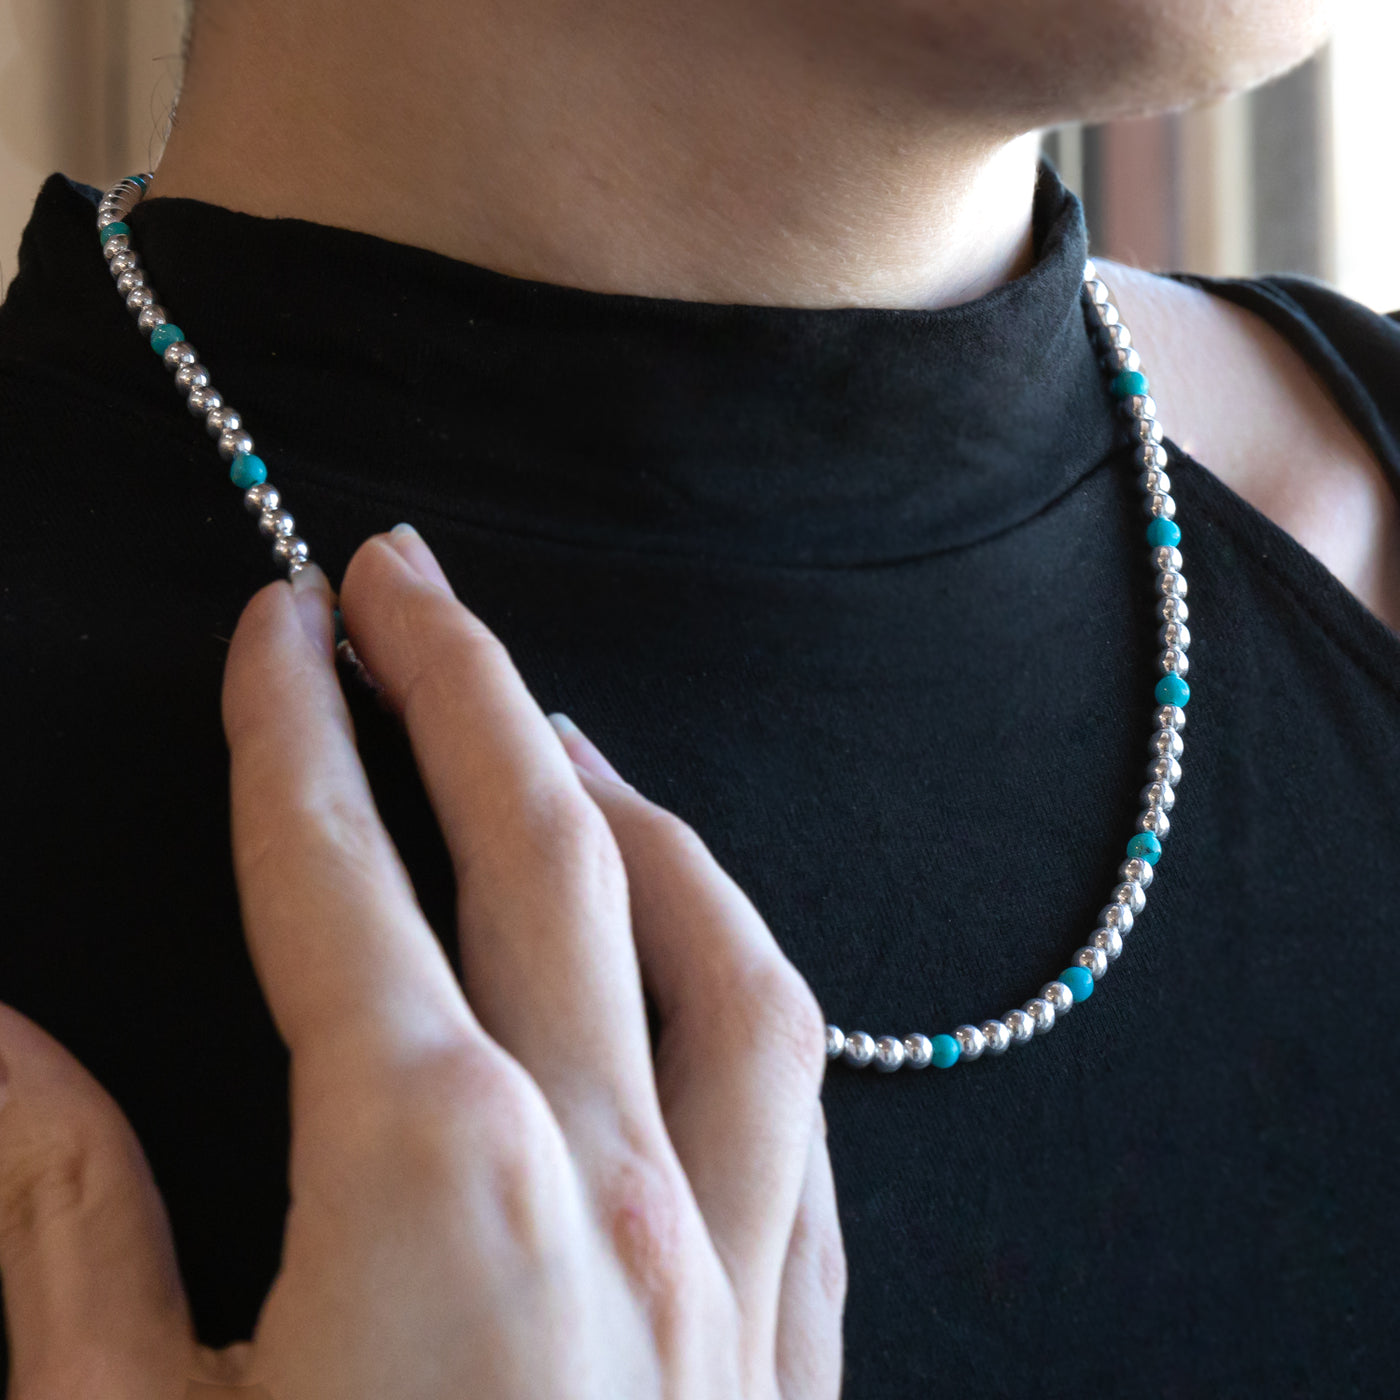 Southwestern Turquoise and Silver Beaded Necklace by TSkies